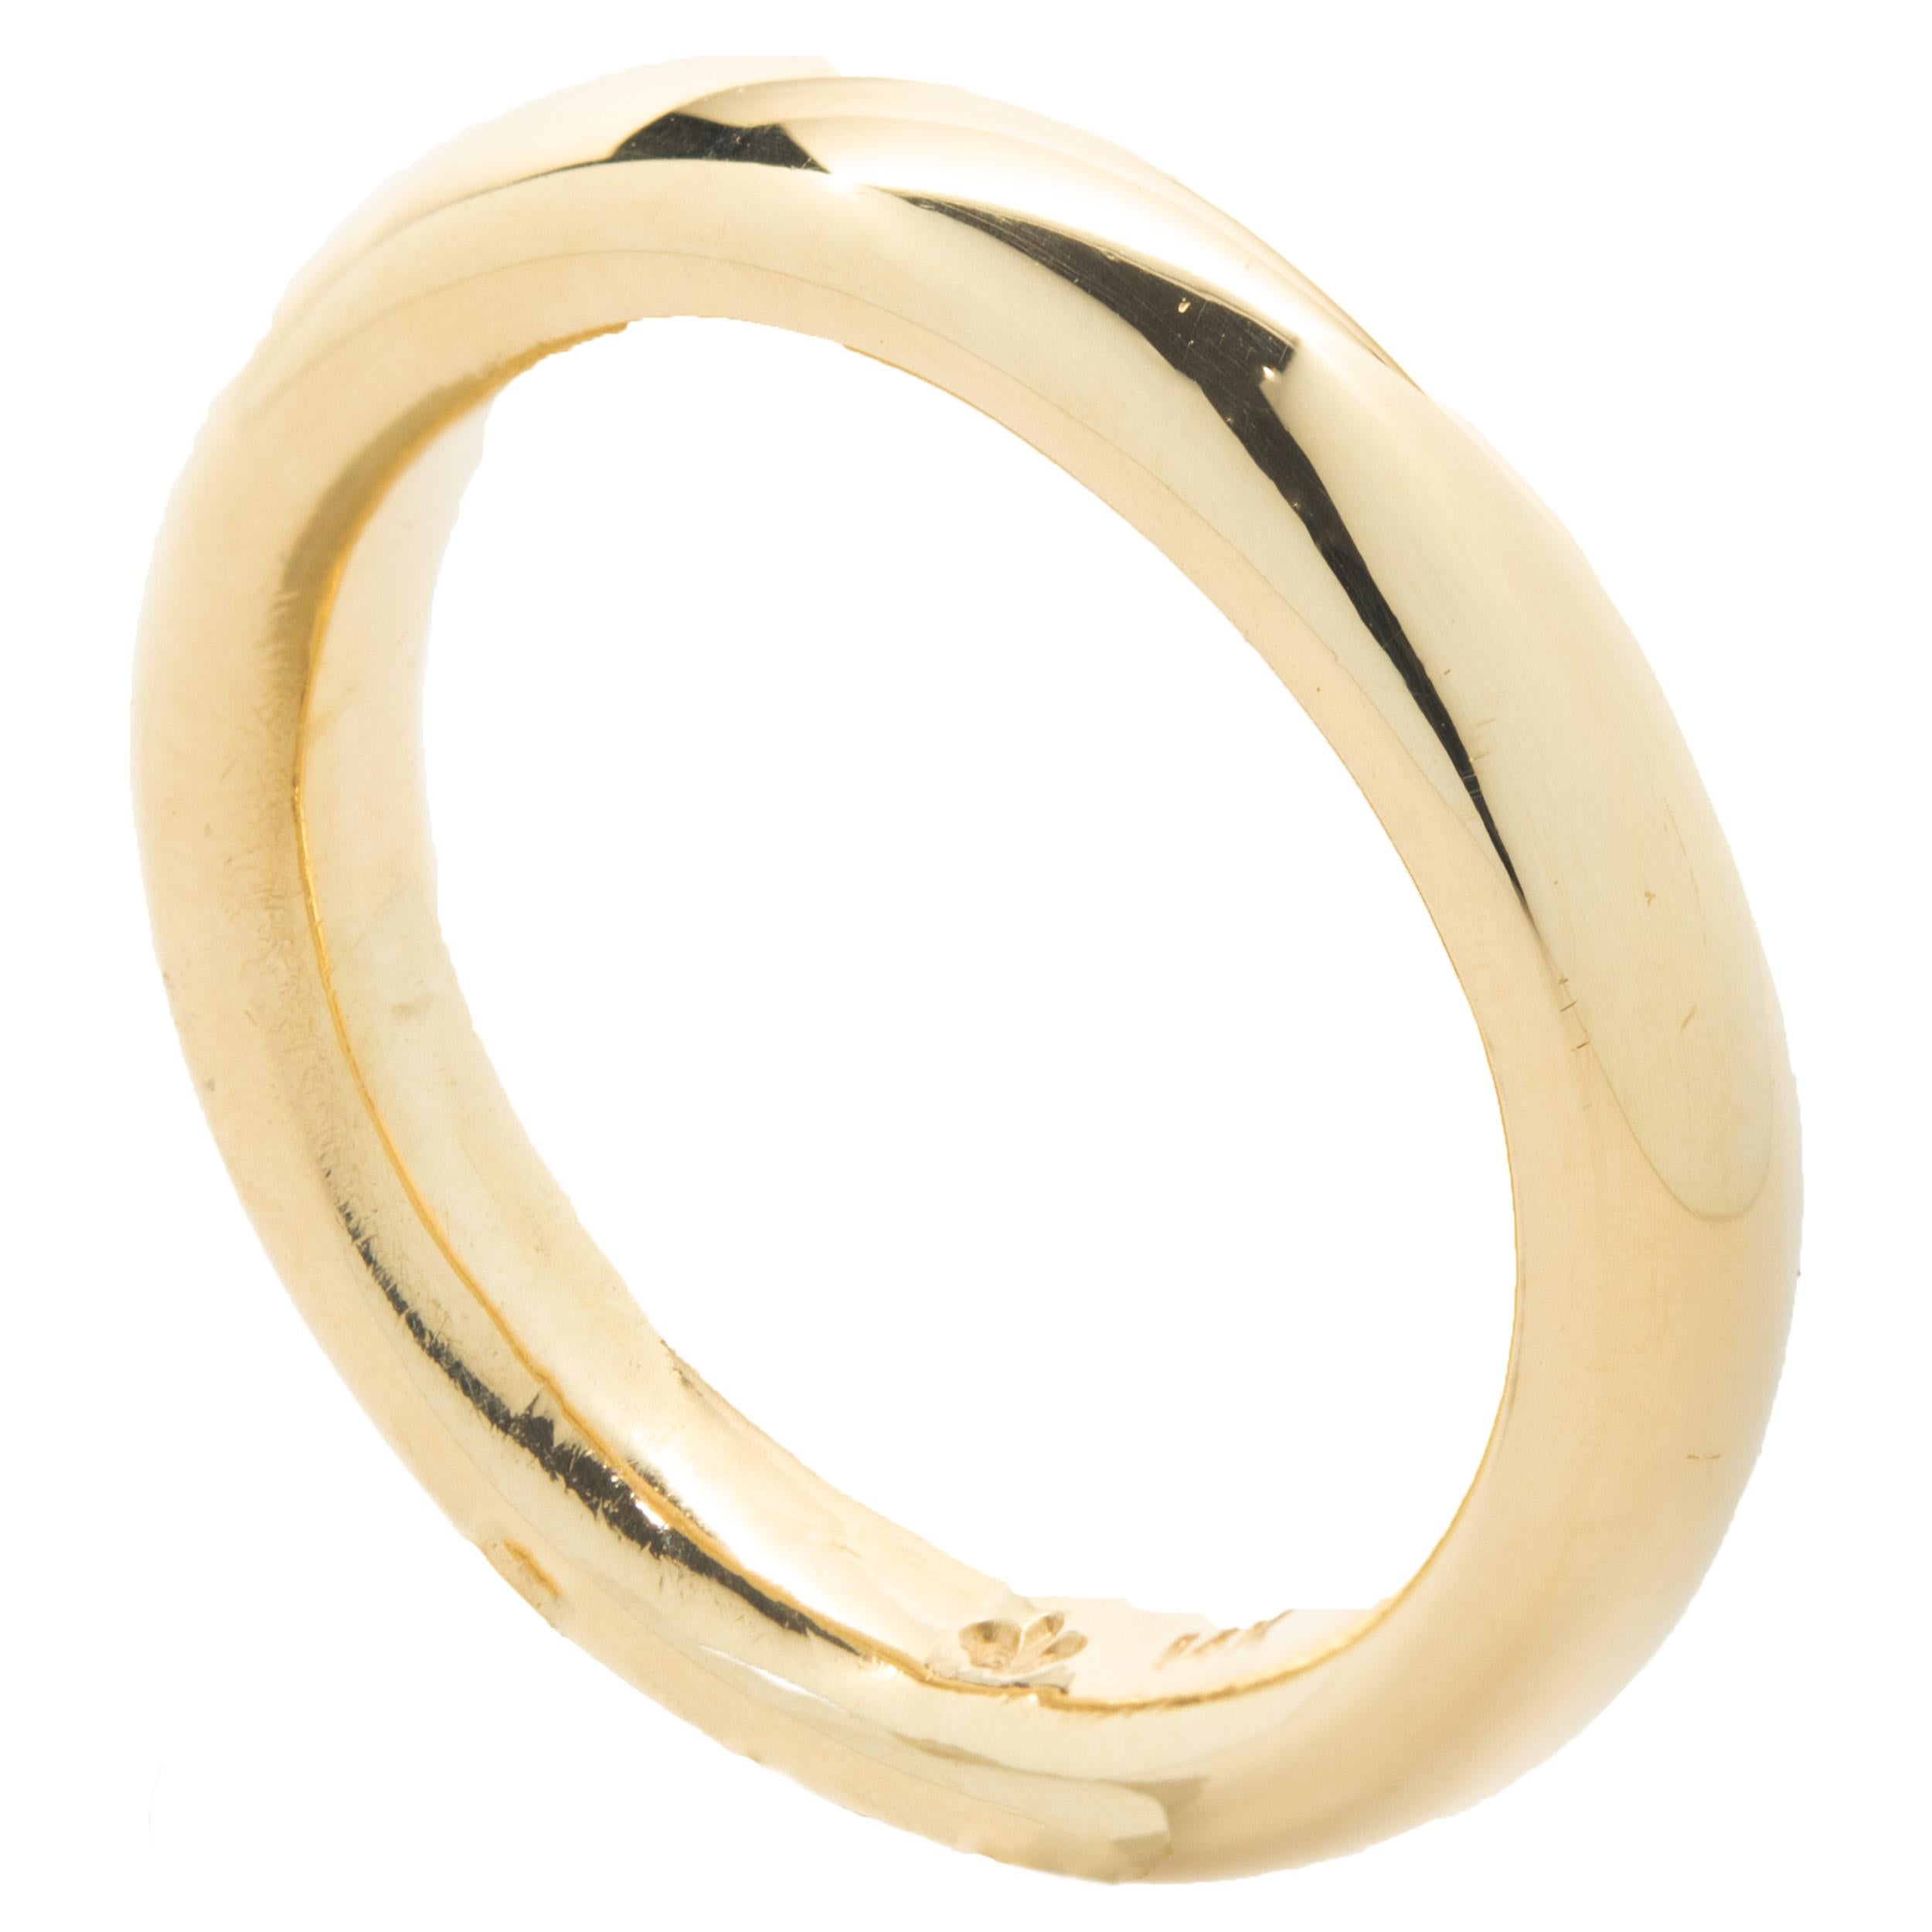 Designer: custom
Material: 14K yellow gold
Dimension: ring measures 4.5mm wide
Size: 7.5
Weight: 9.26 grams